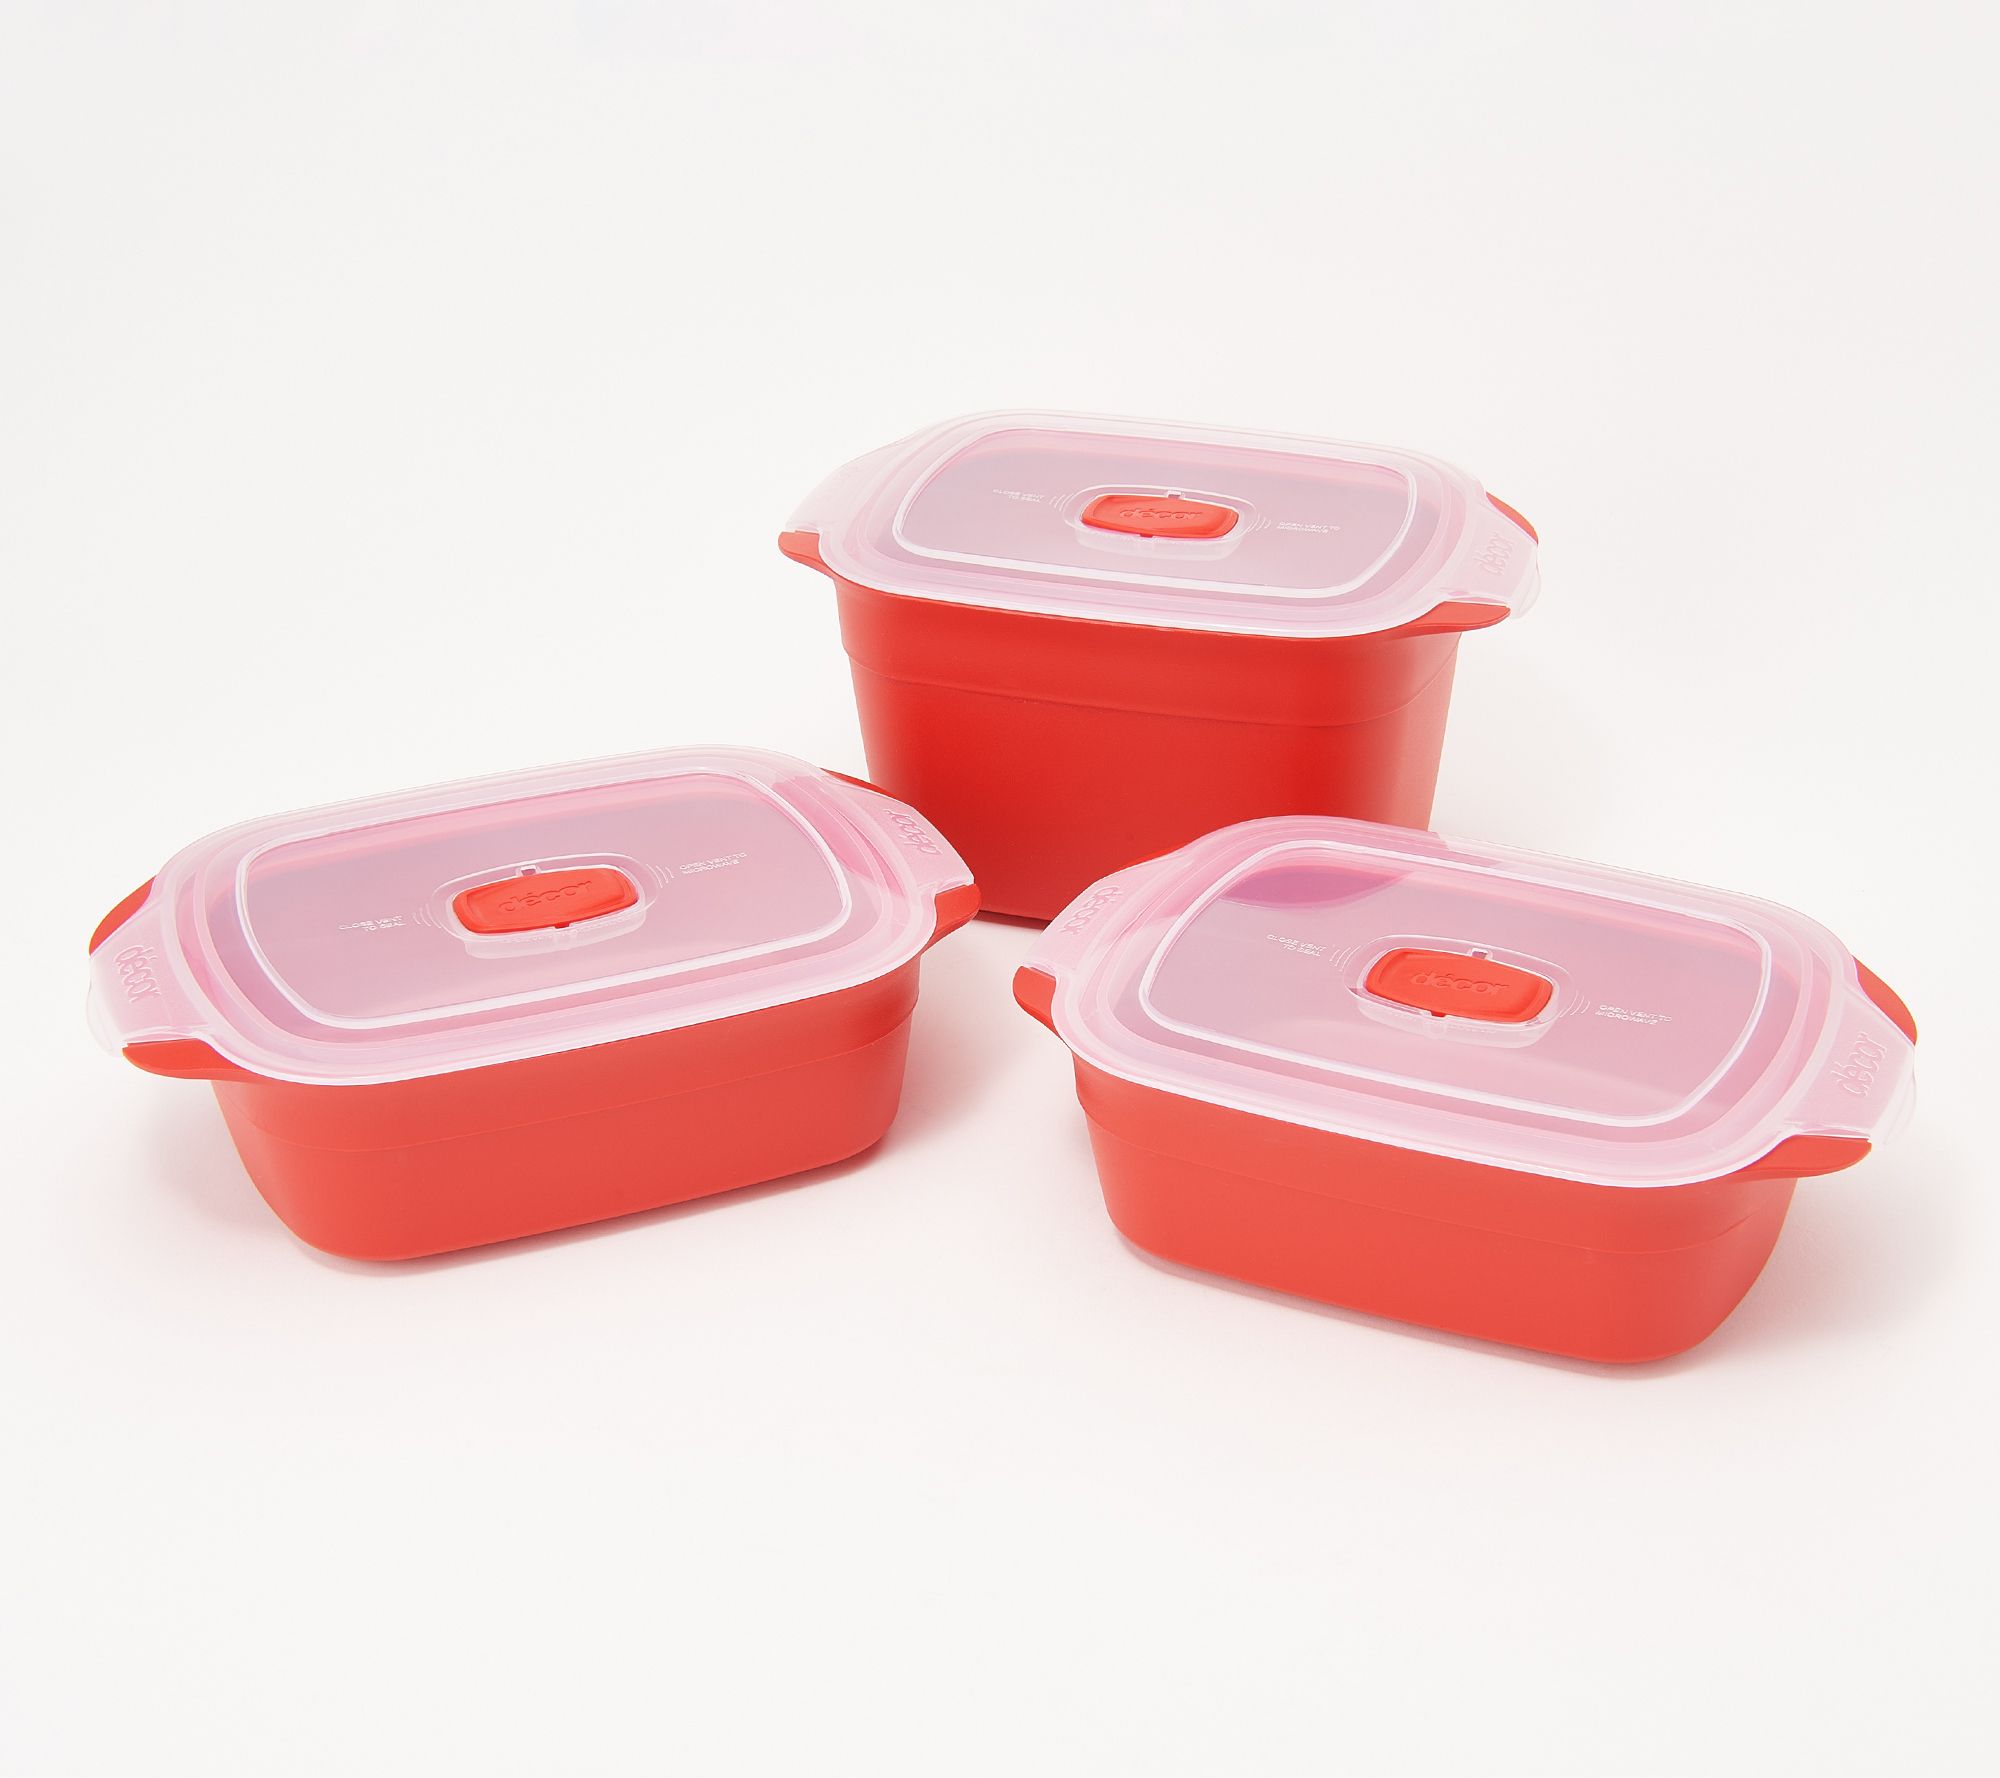 Decor Delish 3-Piece Oblong Microwave CookwareSet ,Red